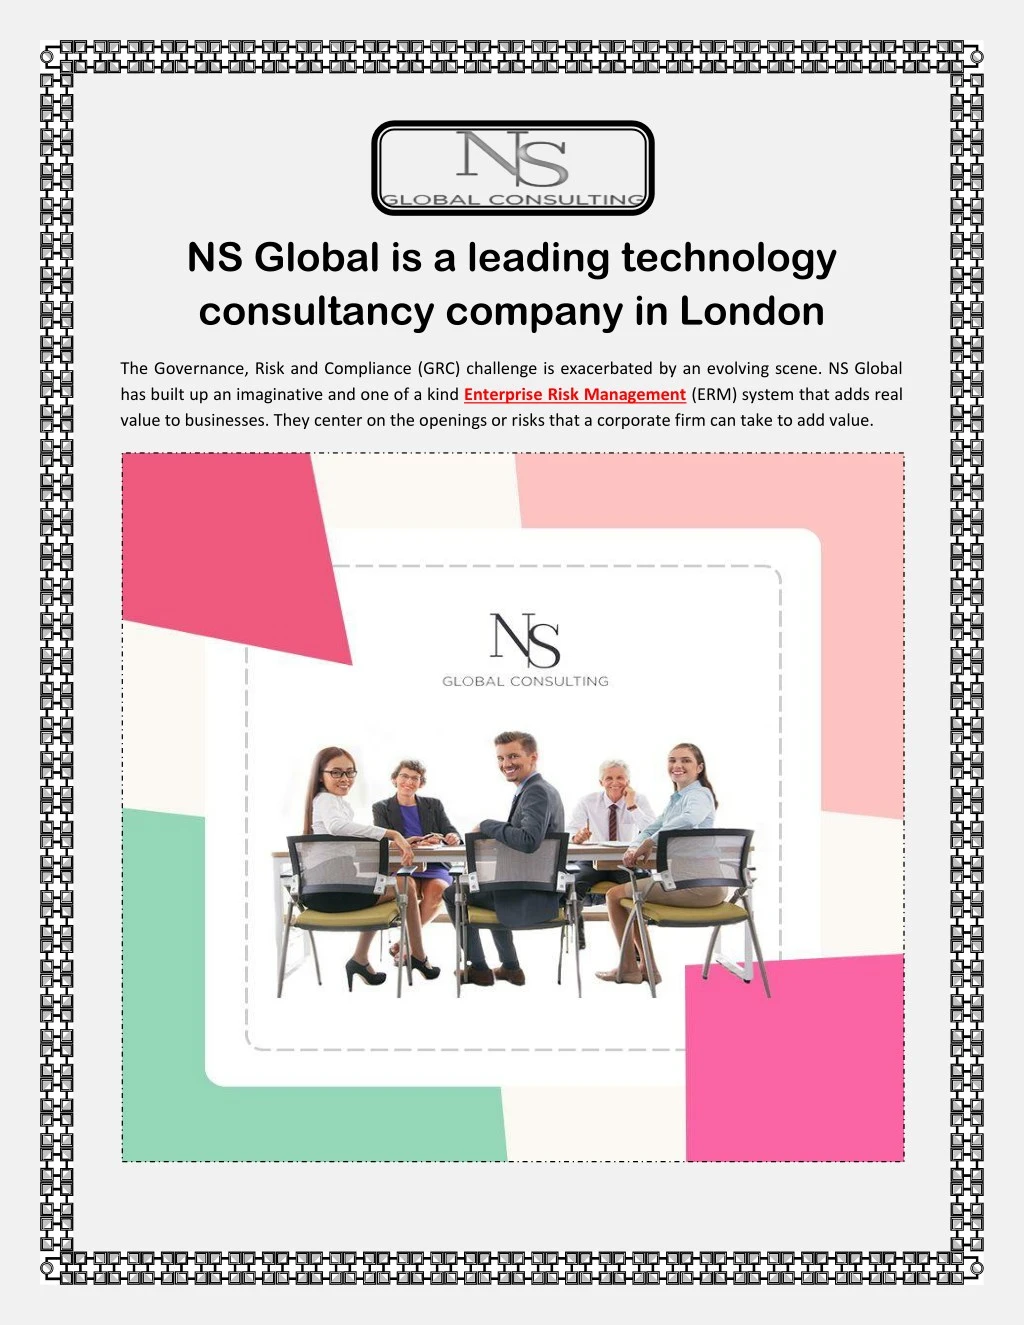 ns global is a leading technology consultancy